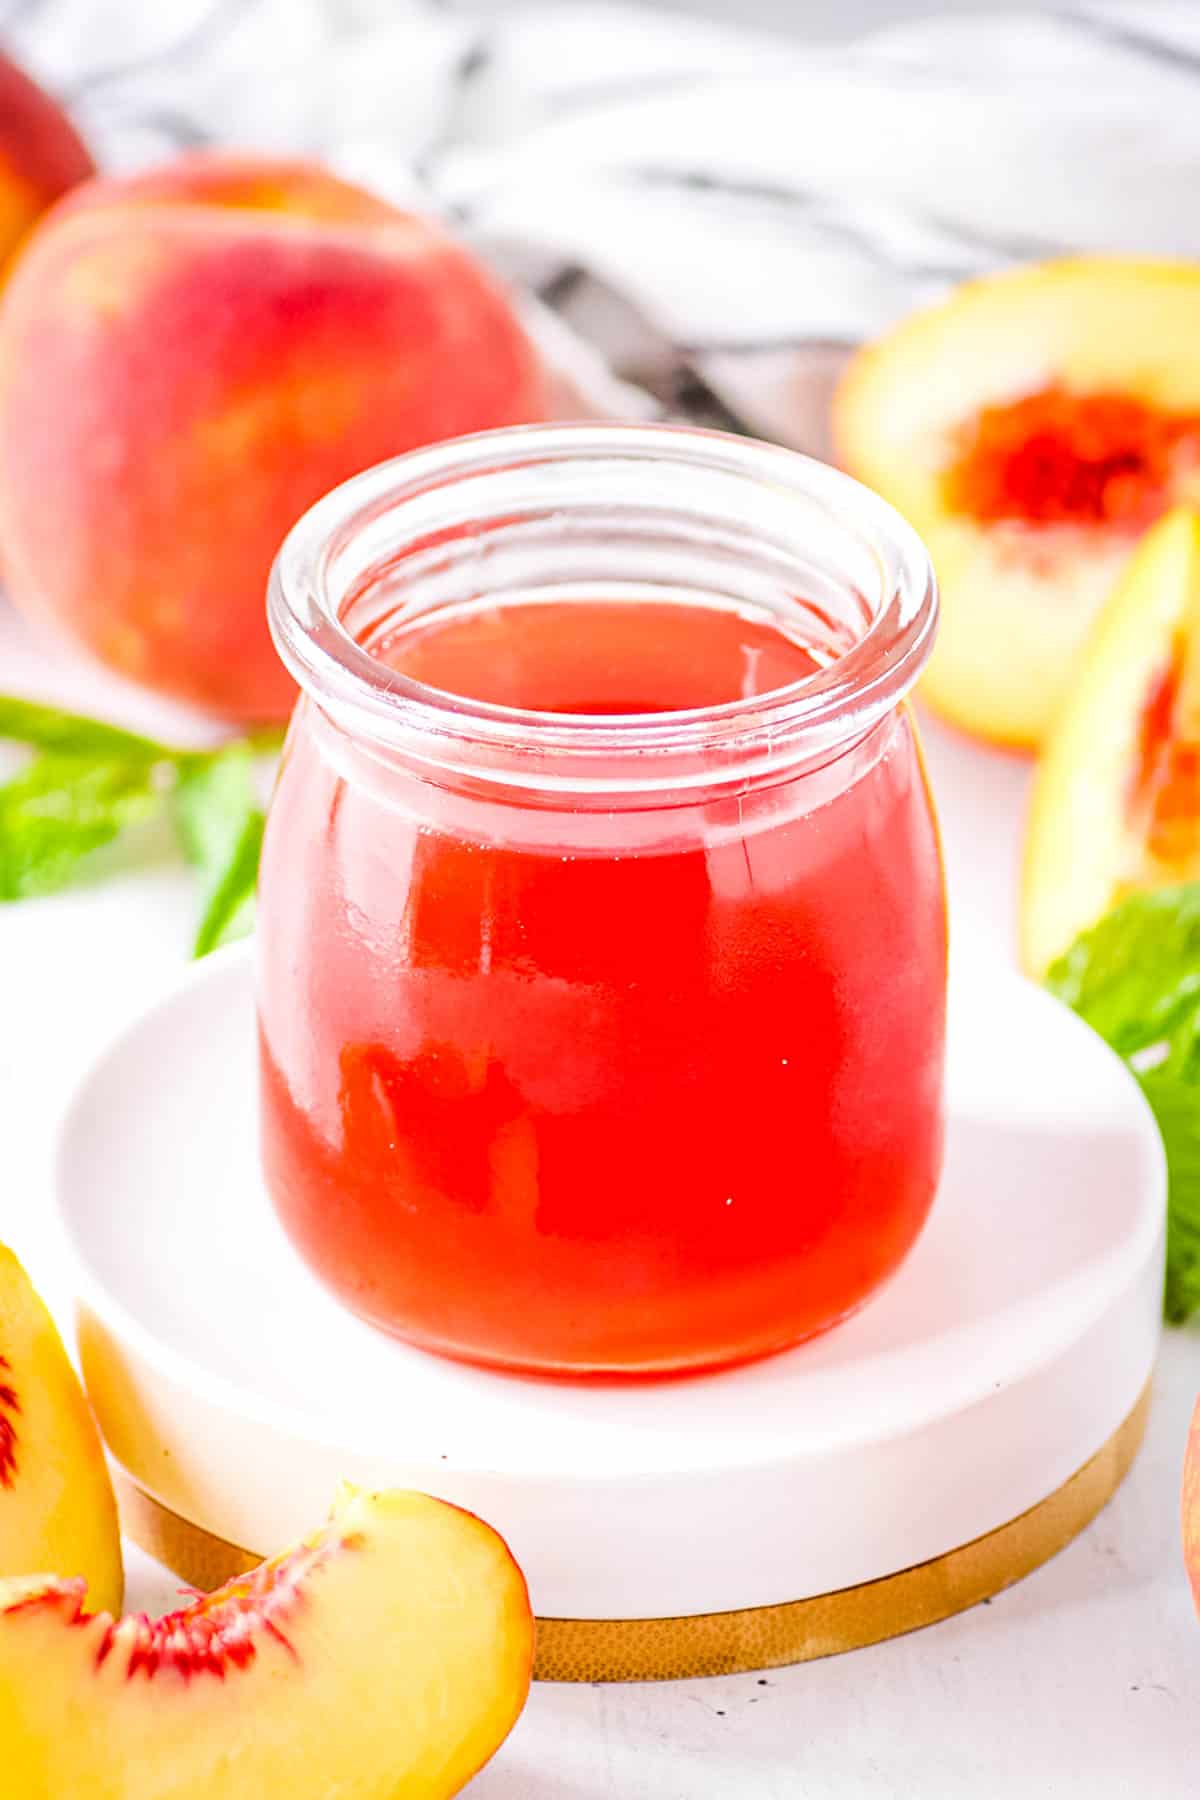 Easy peach simple syrup, stored in a glass jar, surrounded by fresh peach slices.